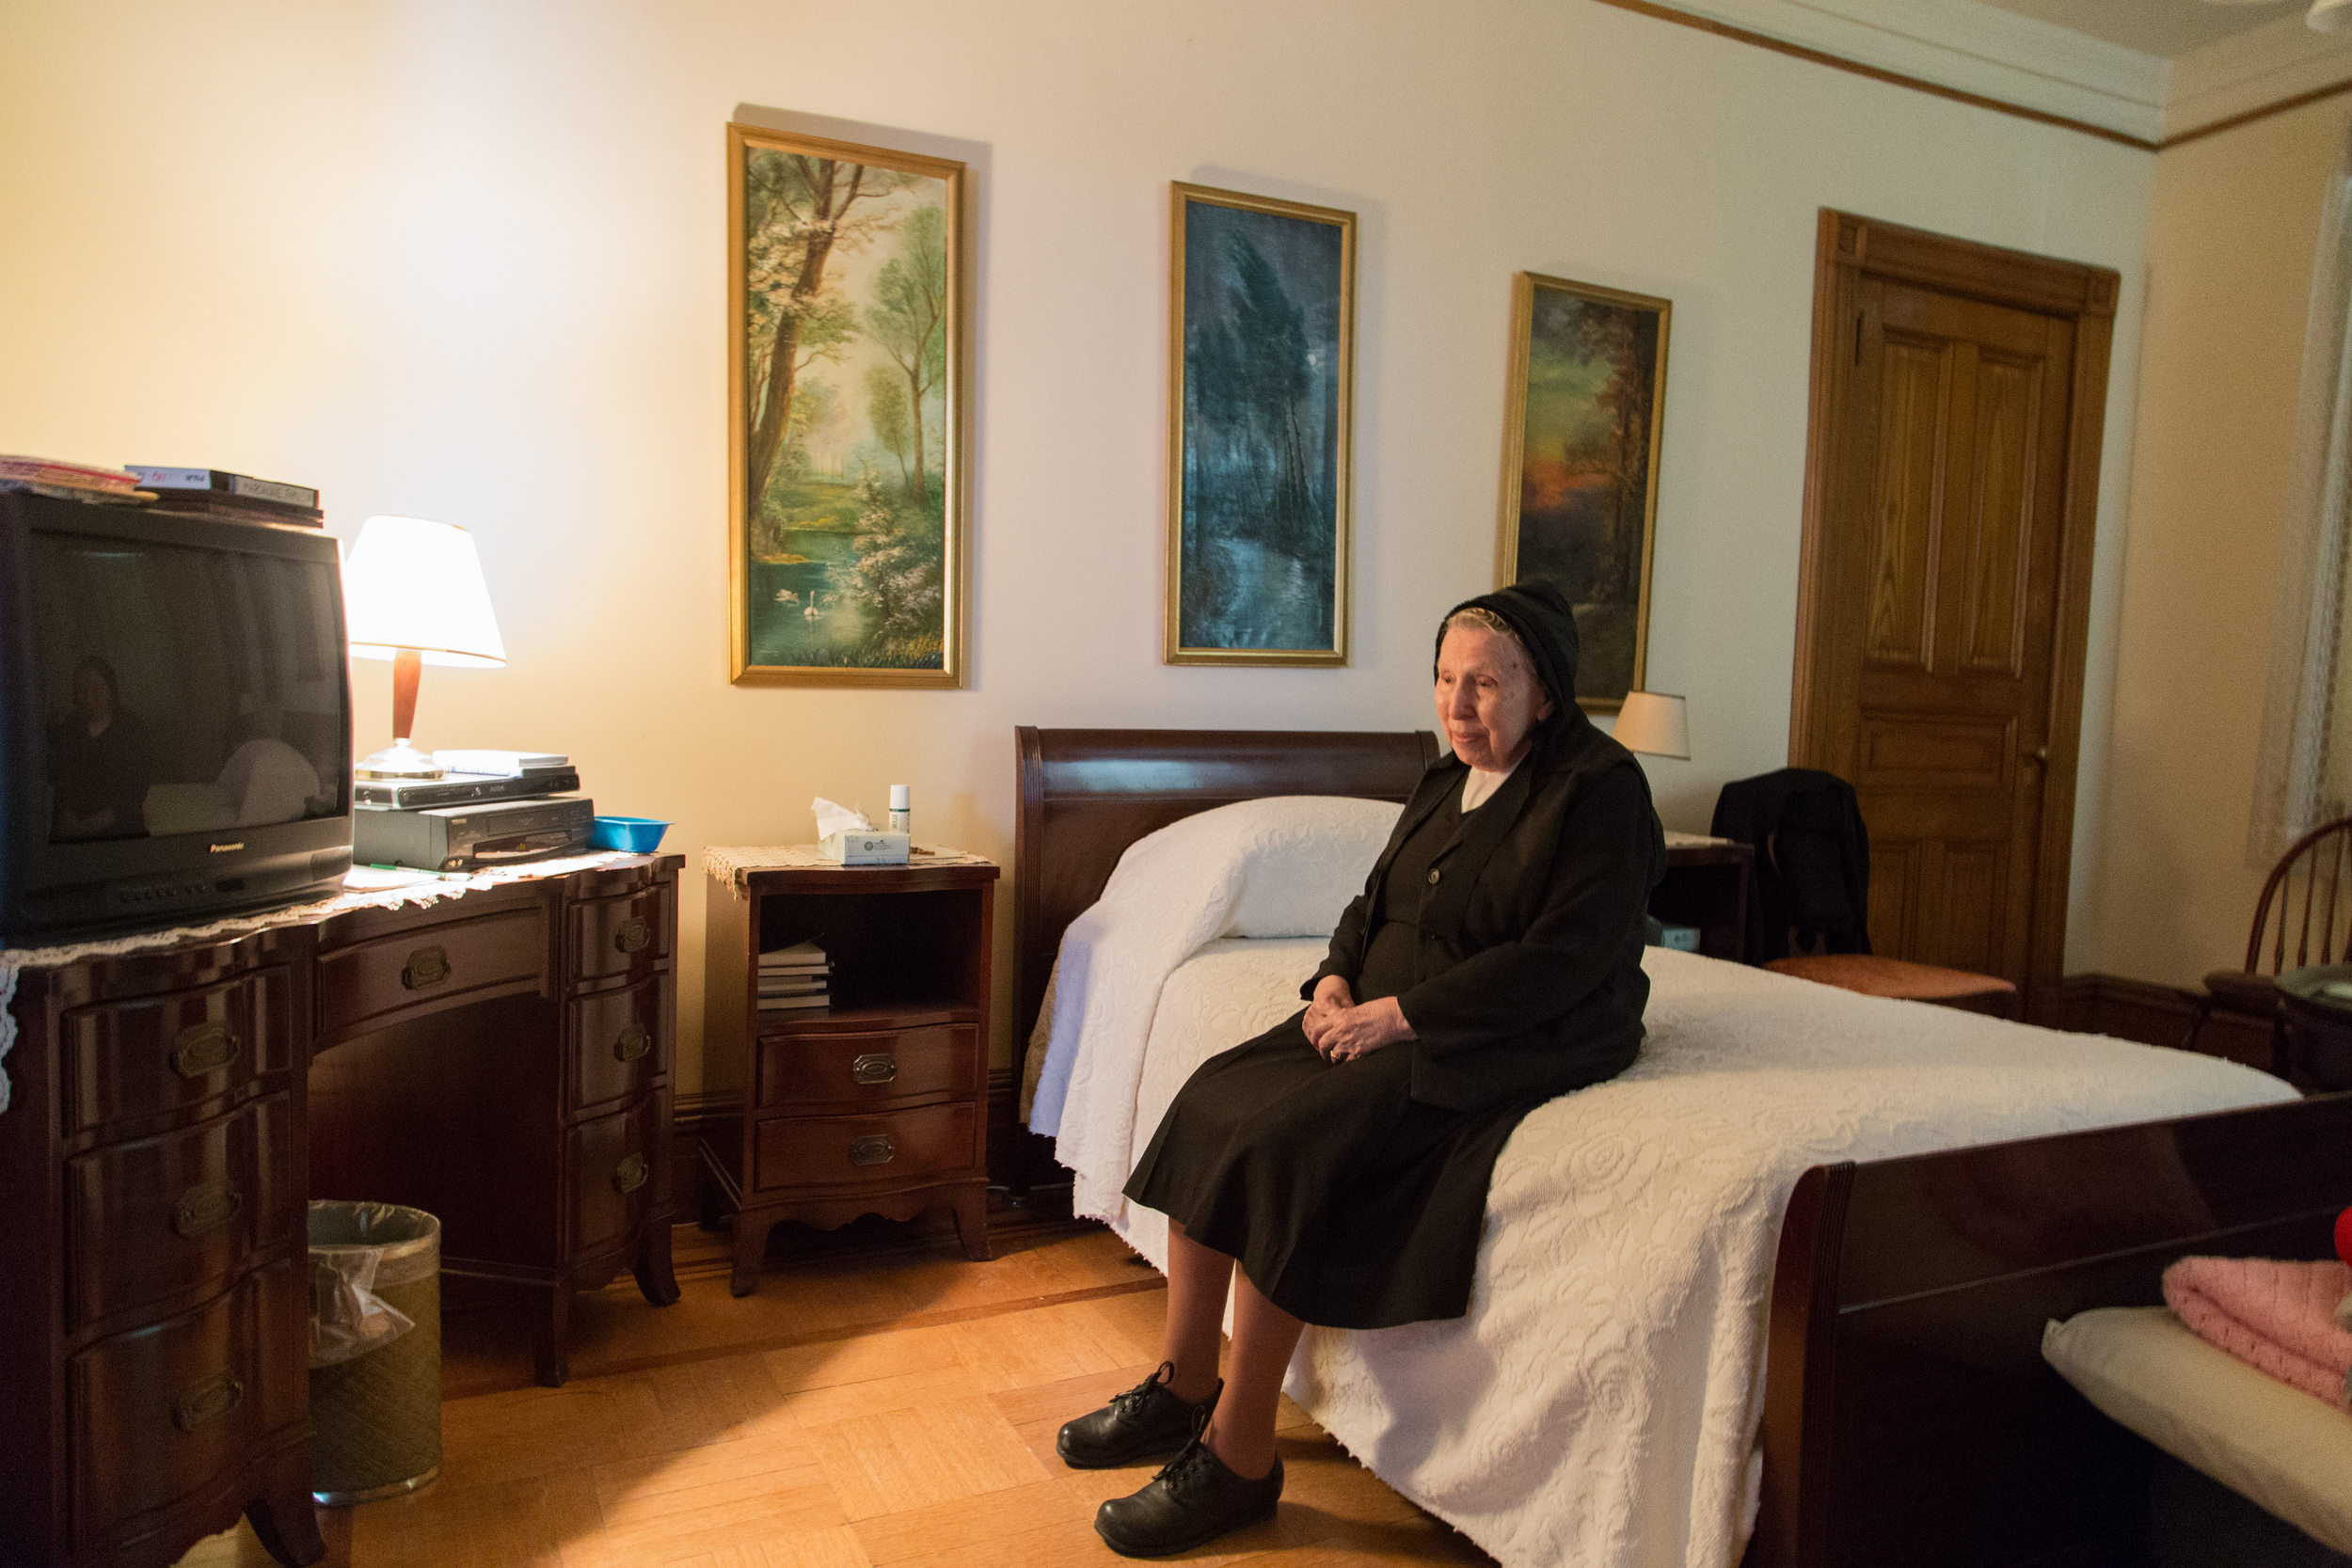   How old were you when you decided to become a nun?   Sr. Margherita Marchione: “I decided to enter the order at thirteen. I was making my confirmation. It was the first time in my life that I’ve seen a Bishop. He spoke and his piercing eyes met min